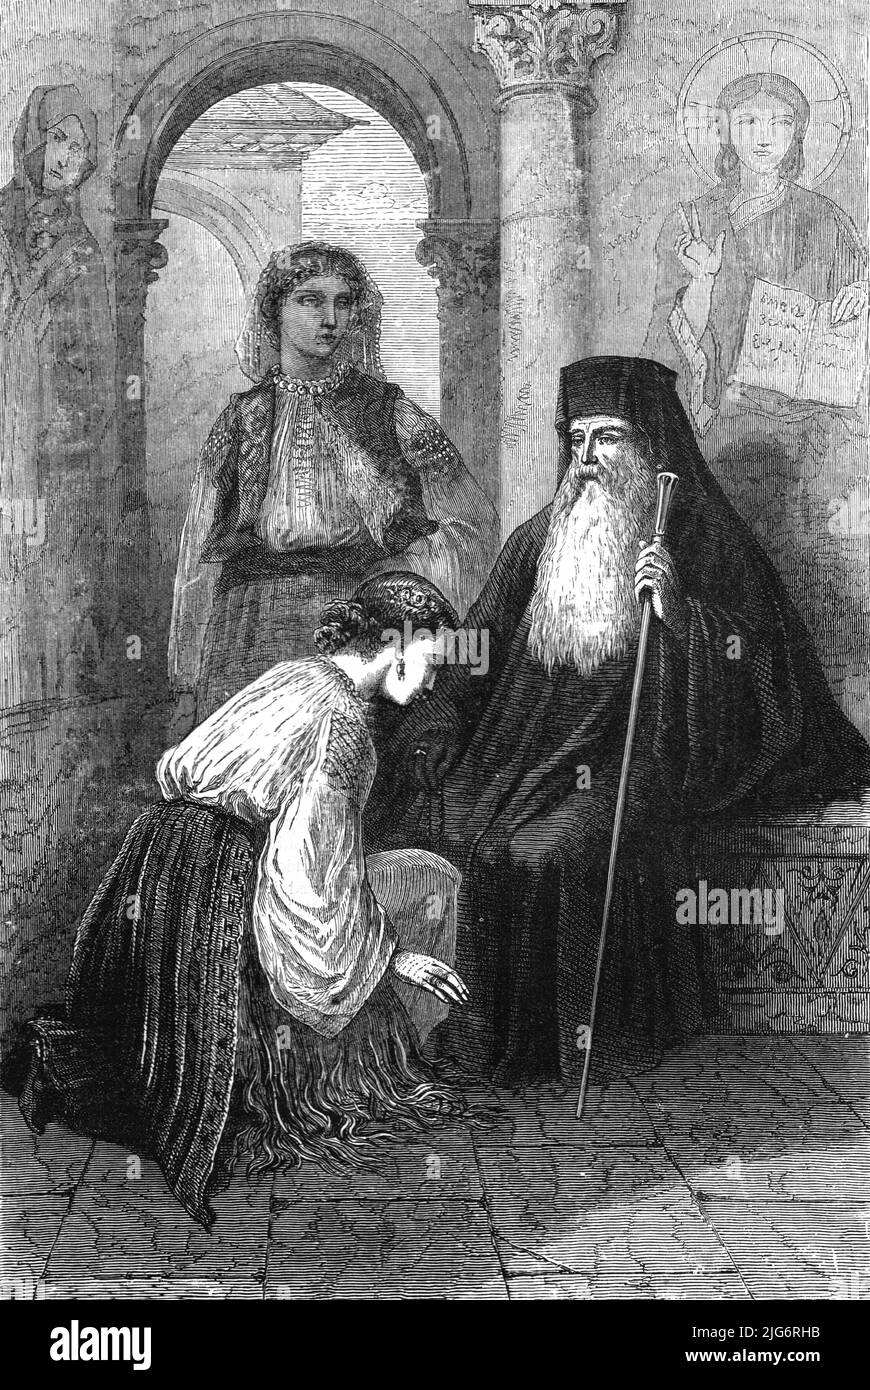 'Worship in Roumania; A Visit to the Danubian Principalities', 1875. [Women with Eastern Orthodox priest, Romania]. From, 'Illustrated Travels' by H.W. Bates. [Cassell, Petter, and Galpin, c1880, London] Stock Photo